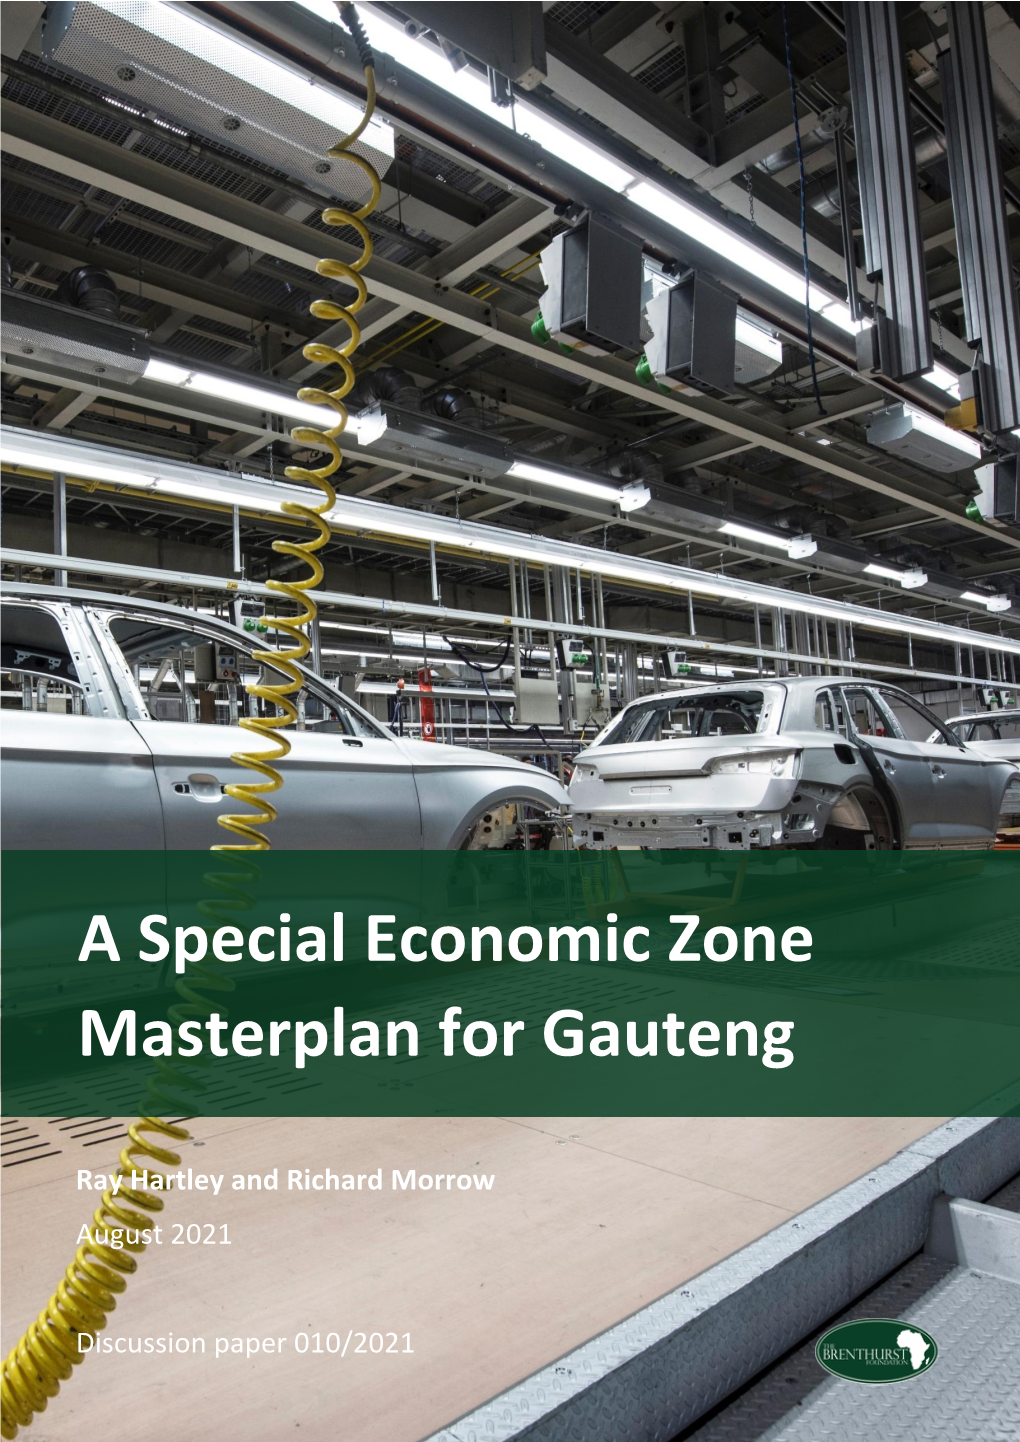 A Special Economic Zone Masterplan for Gauteng